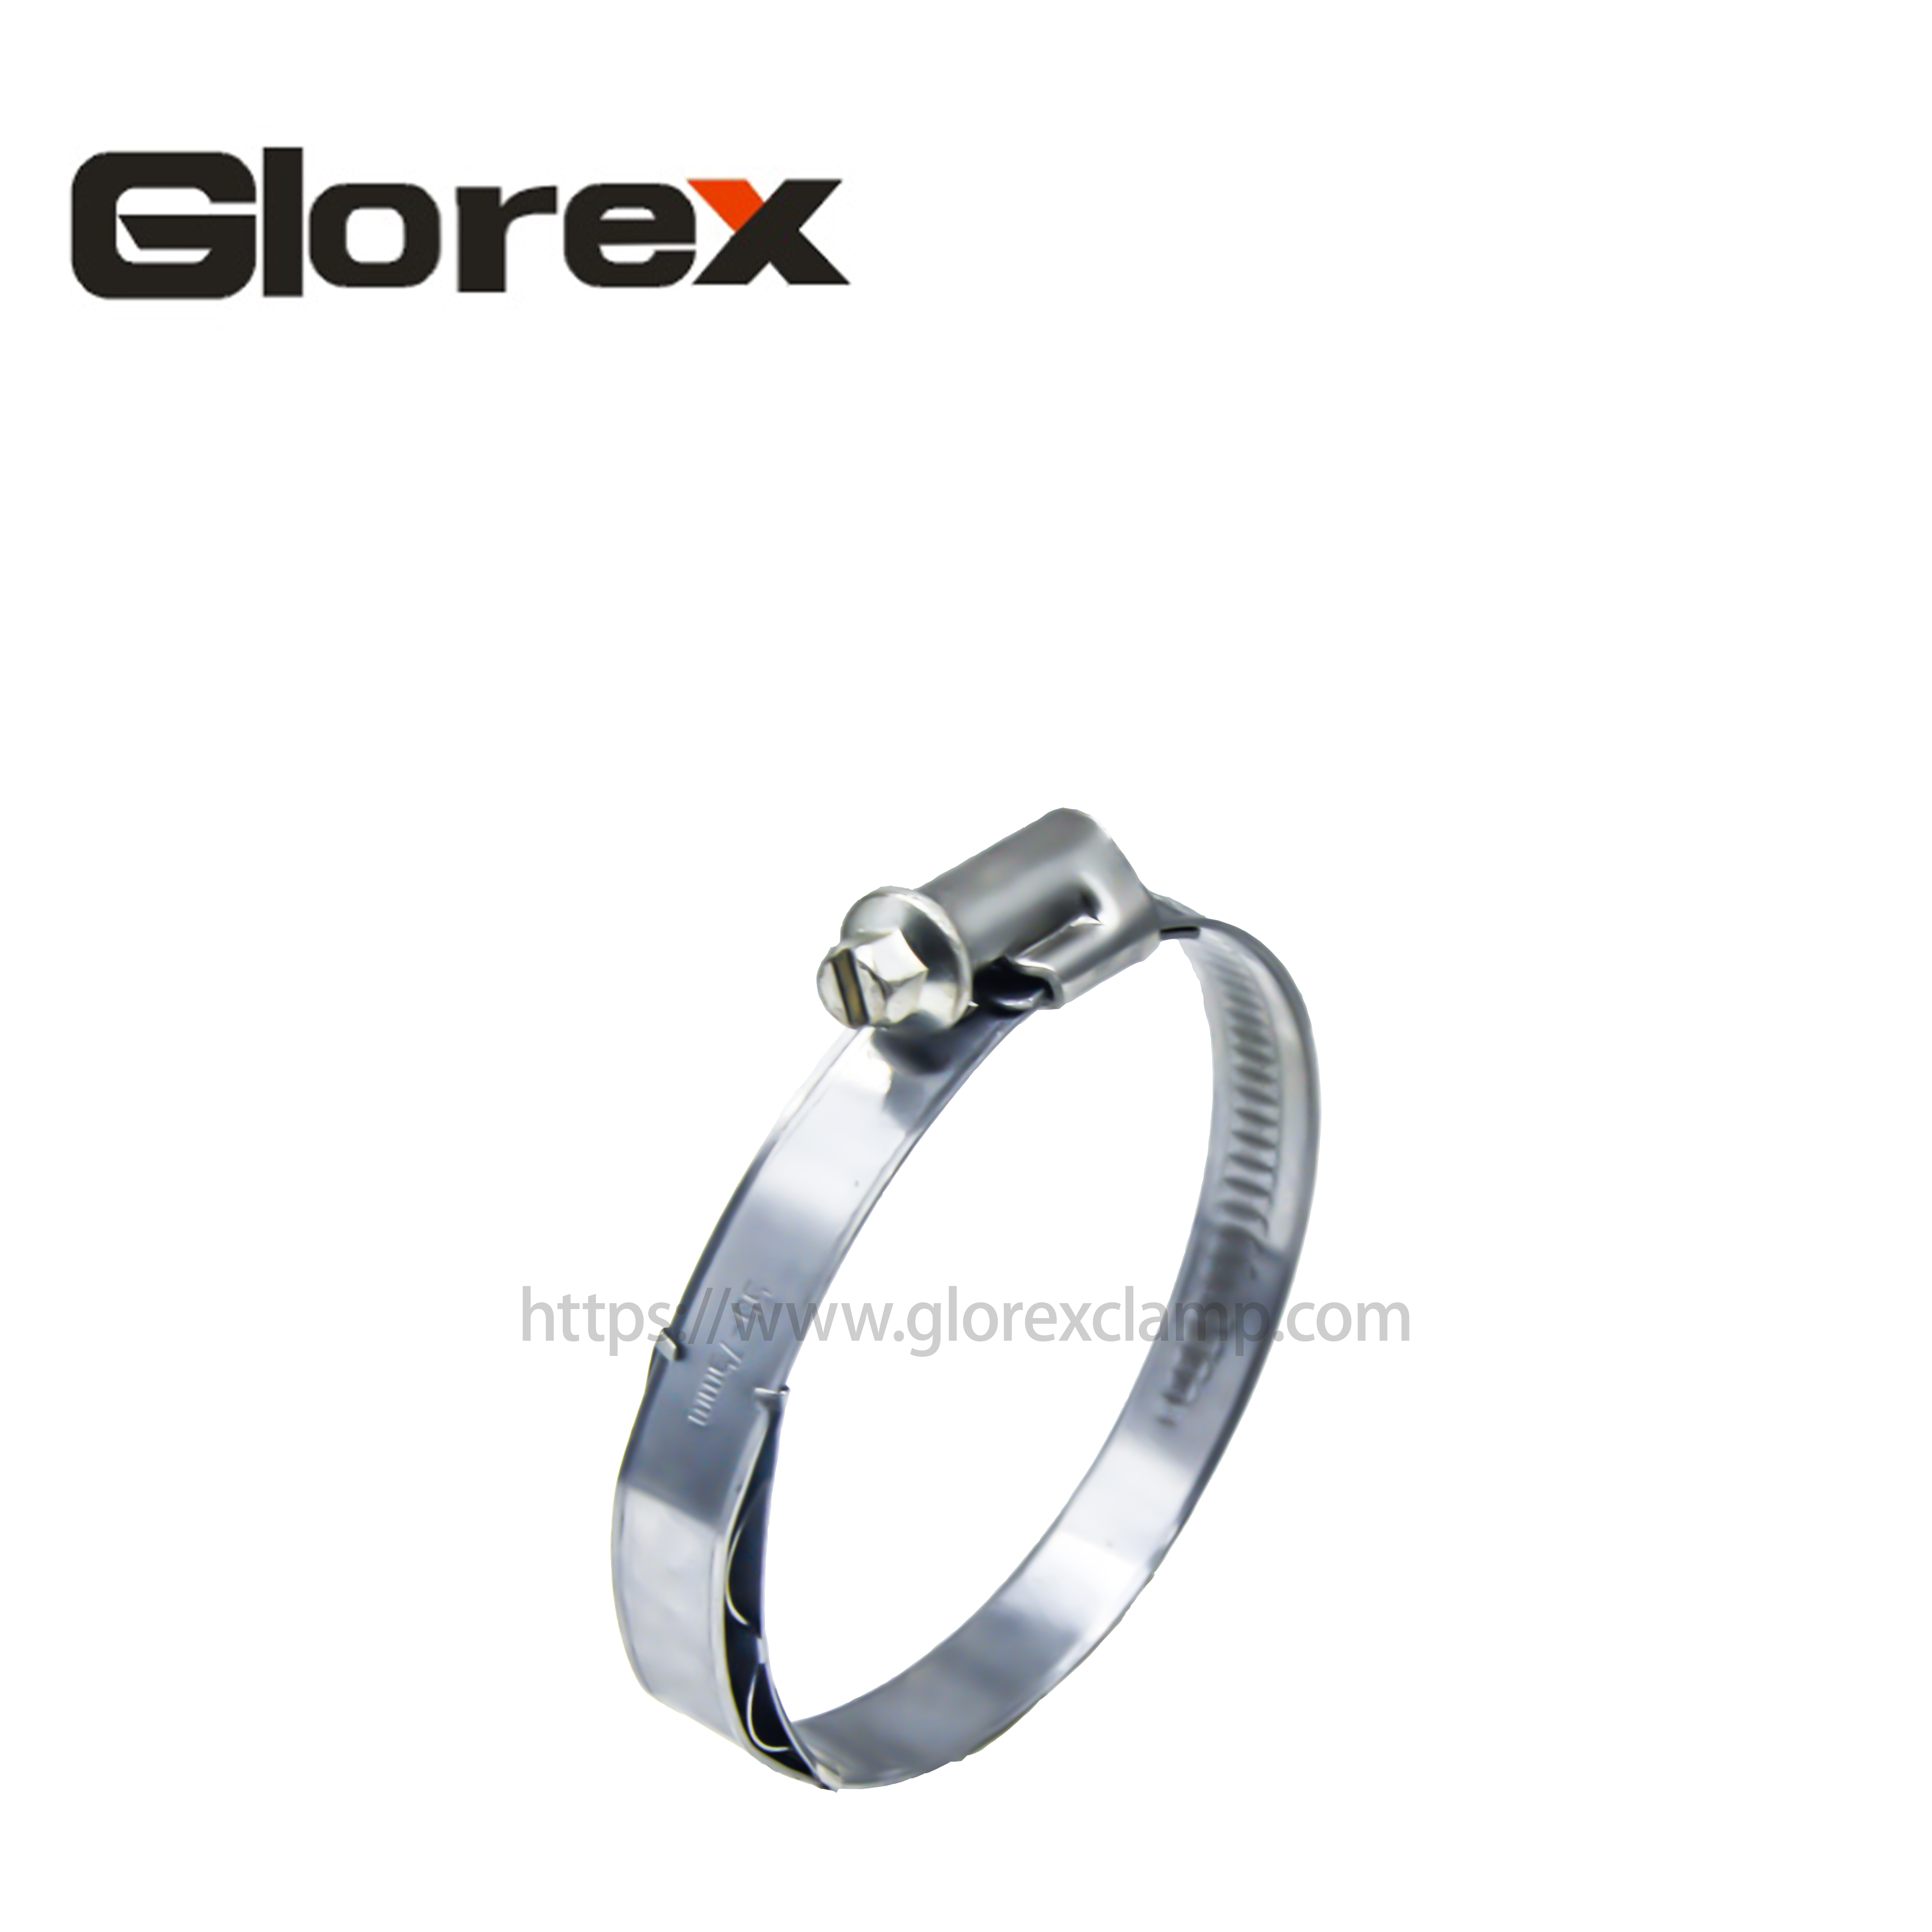 China New Product Helix Hose Clamps - German type hose clamp without welding(with a spring) – Glorex